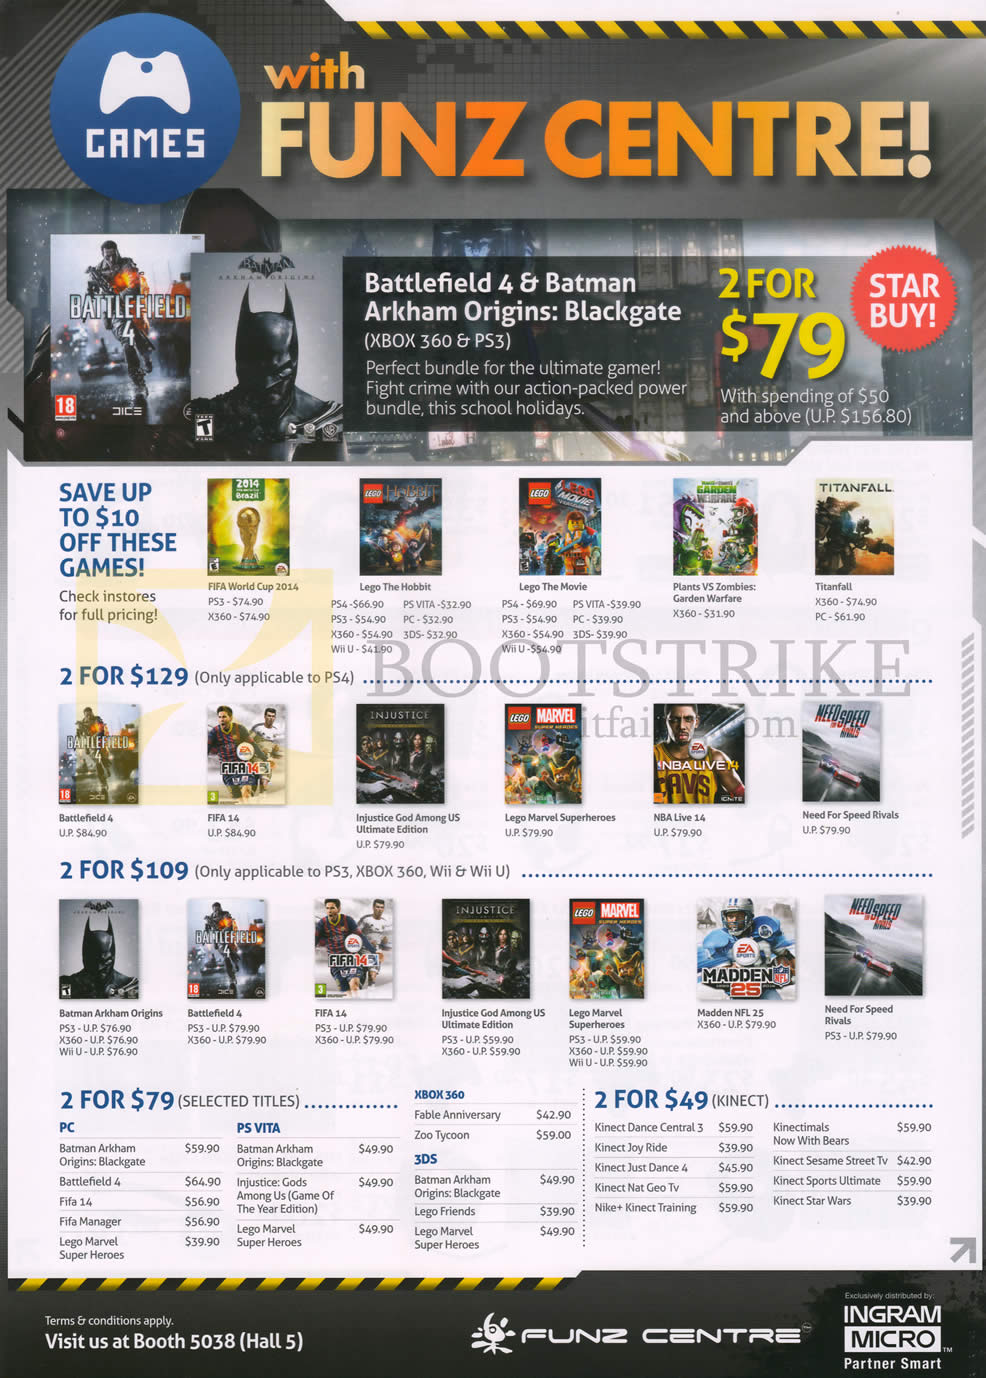 PC SHOW 2014 price list image brochure of Funz Centre Games PS4 Playstation 4, Xbox 360, Wii, Wii U, PC, 3DS, PS Vita, Kinect